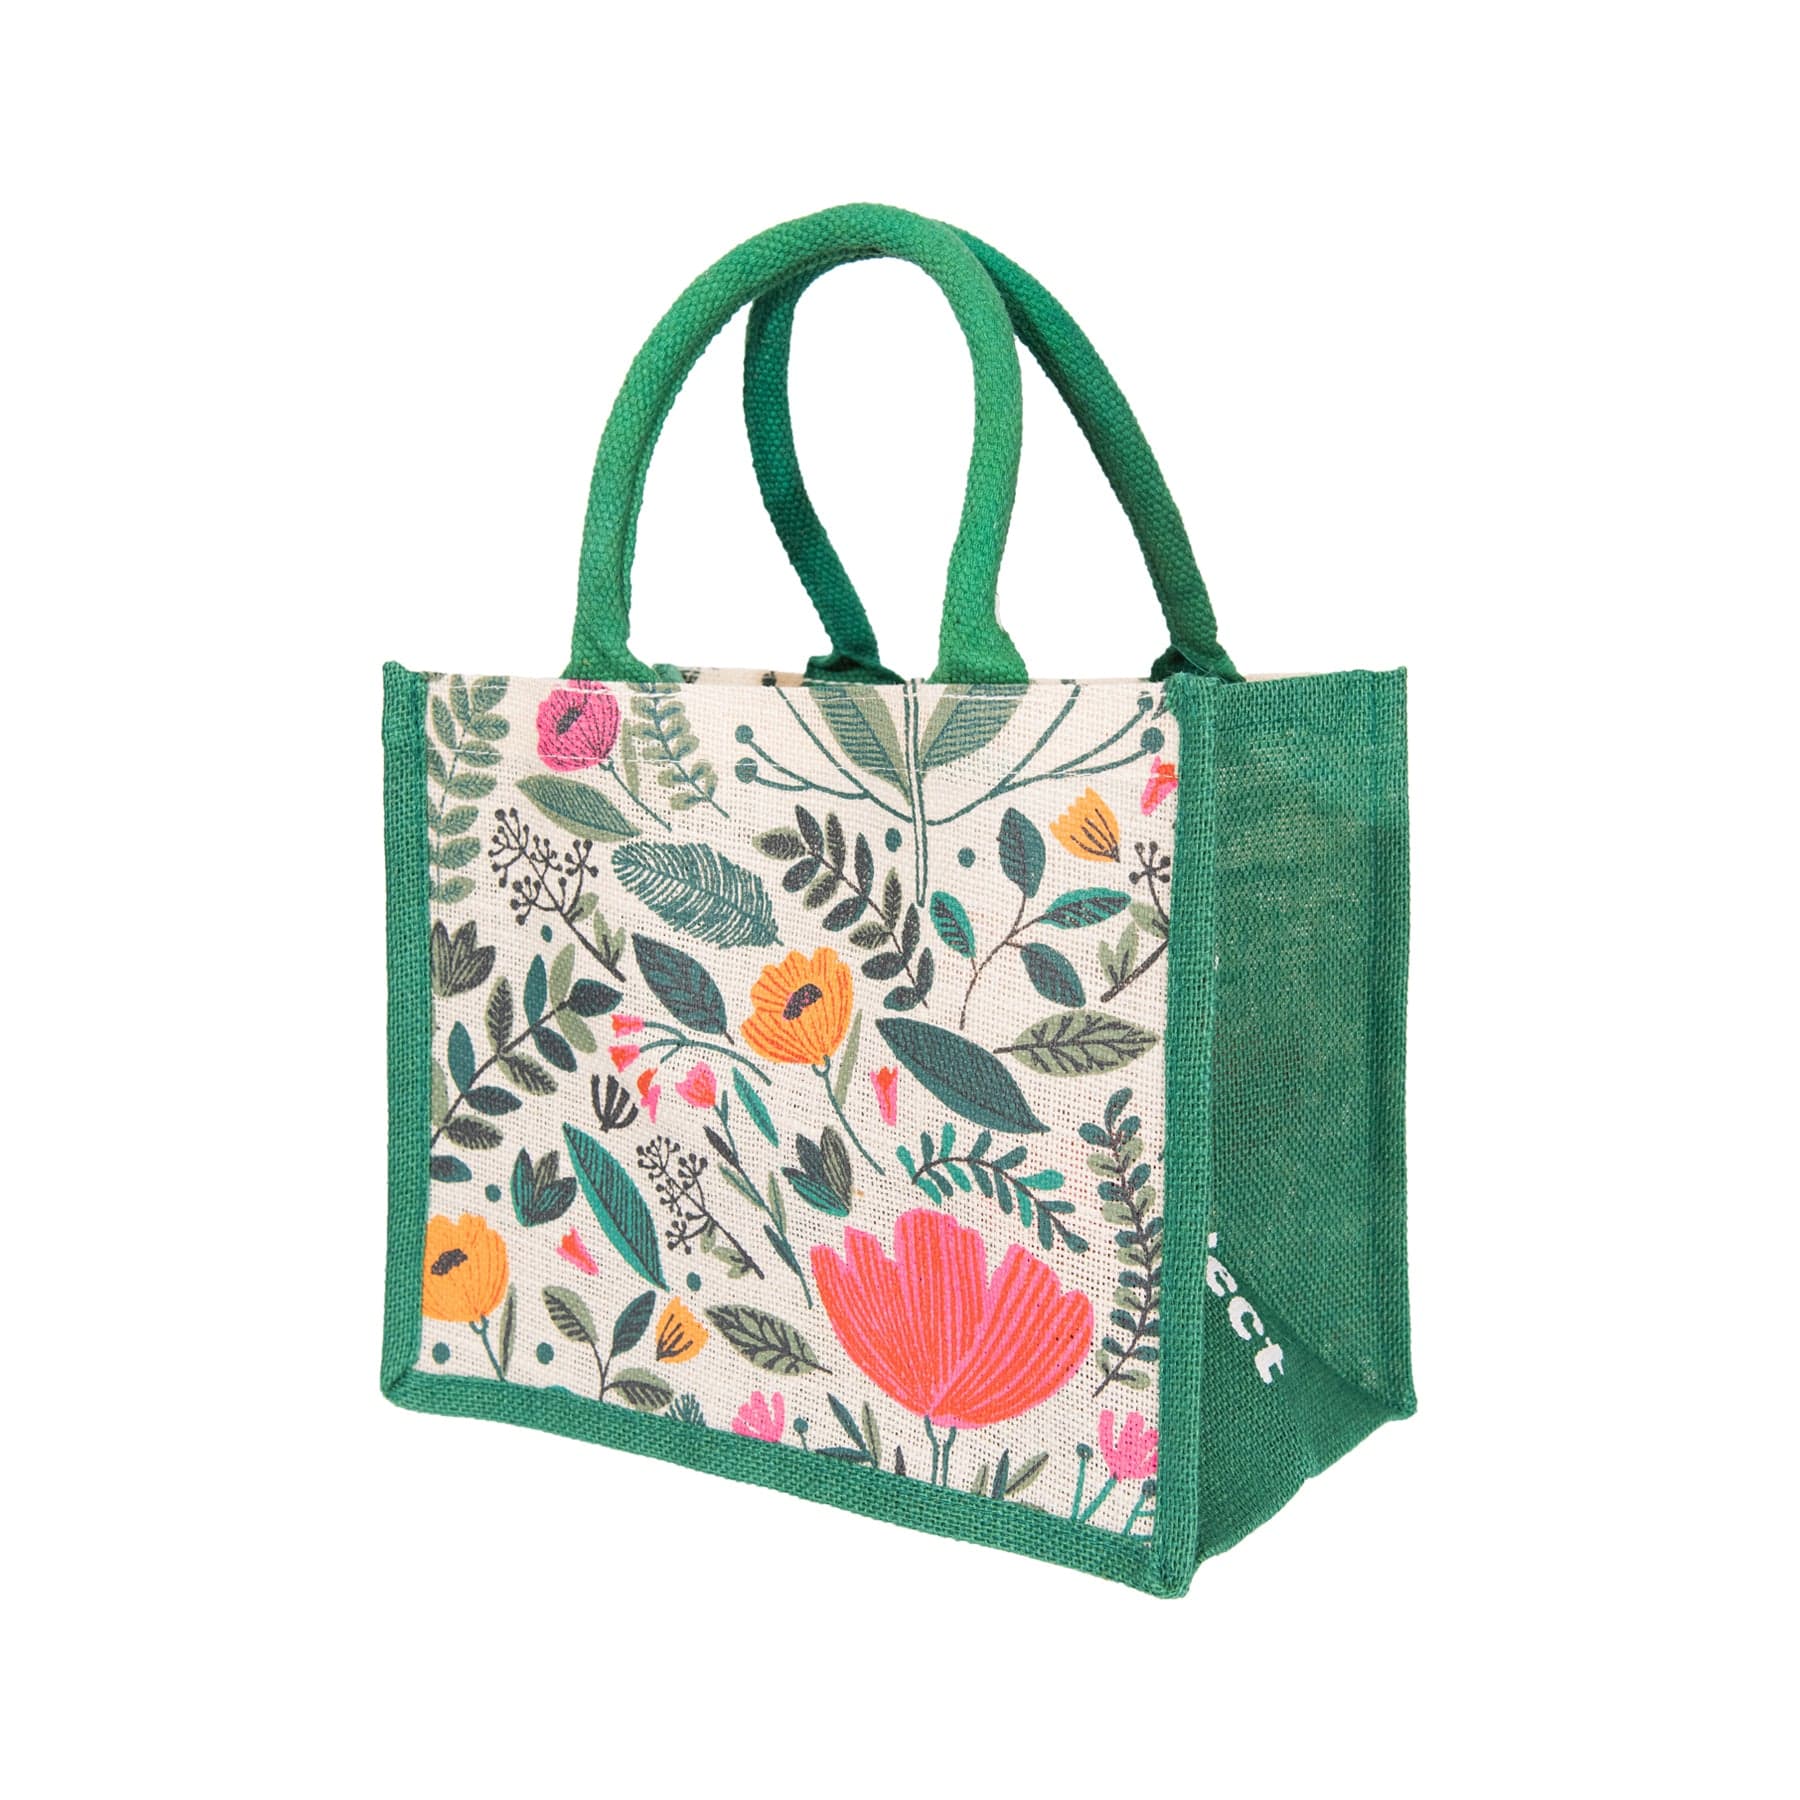 Floral pattern tote bag, reusable shopping bag with botanical print, eco-friendly canvas tote, green handles, colorful flower design, white background.